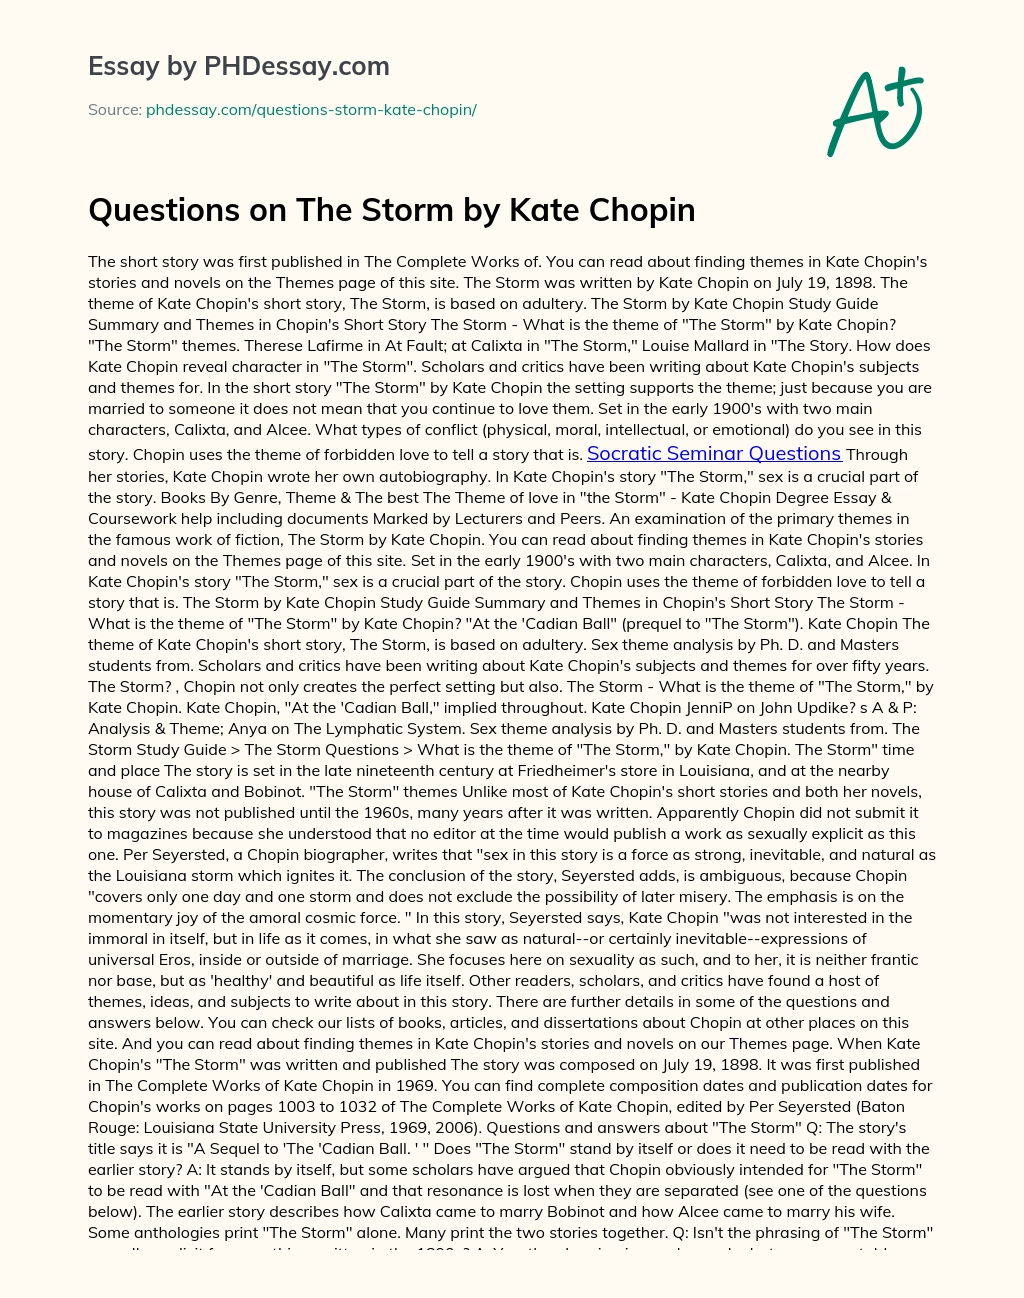 Questions on The Storm by Kate Chopin essay